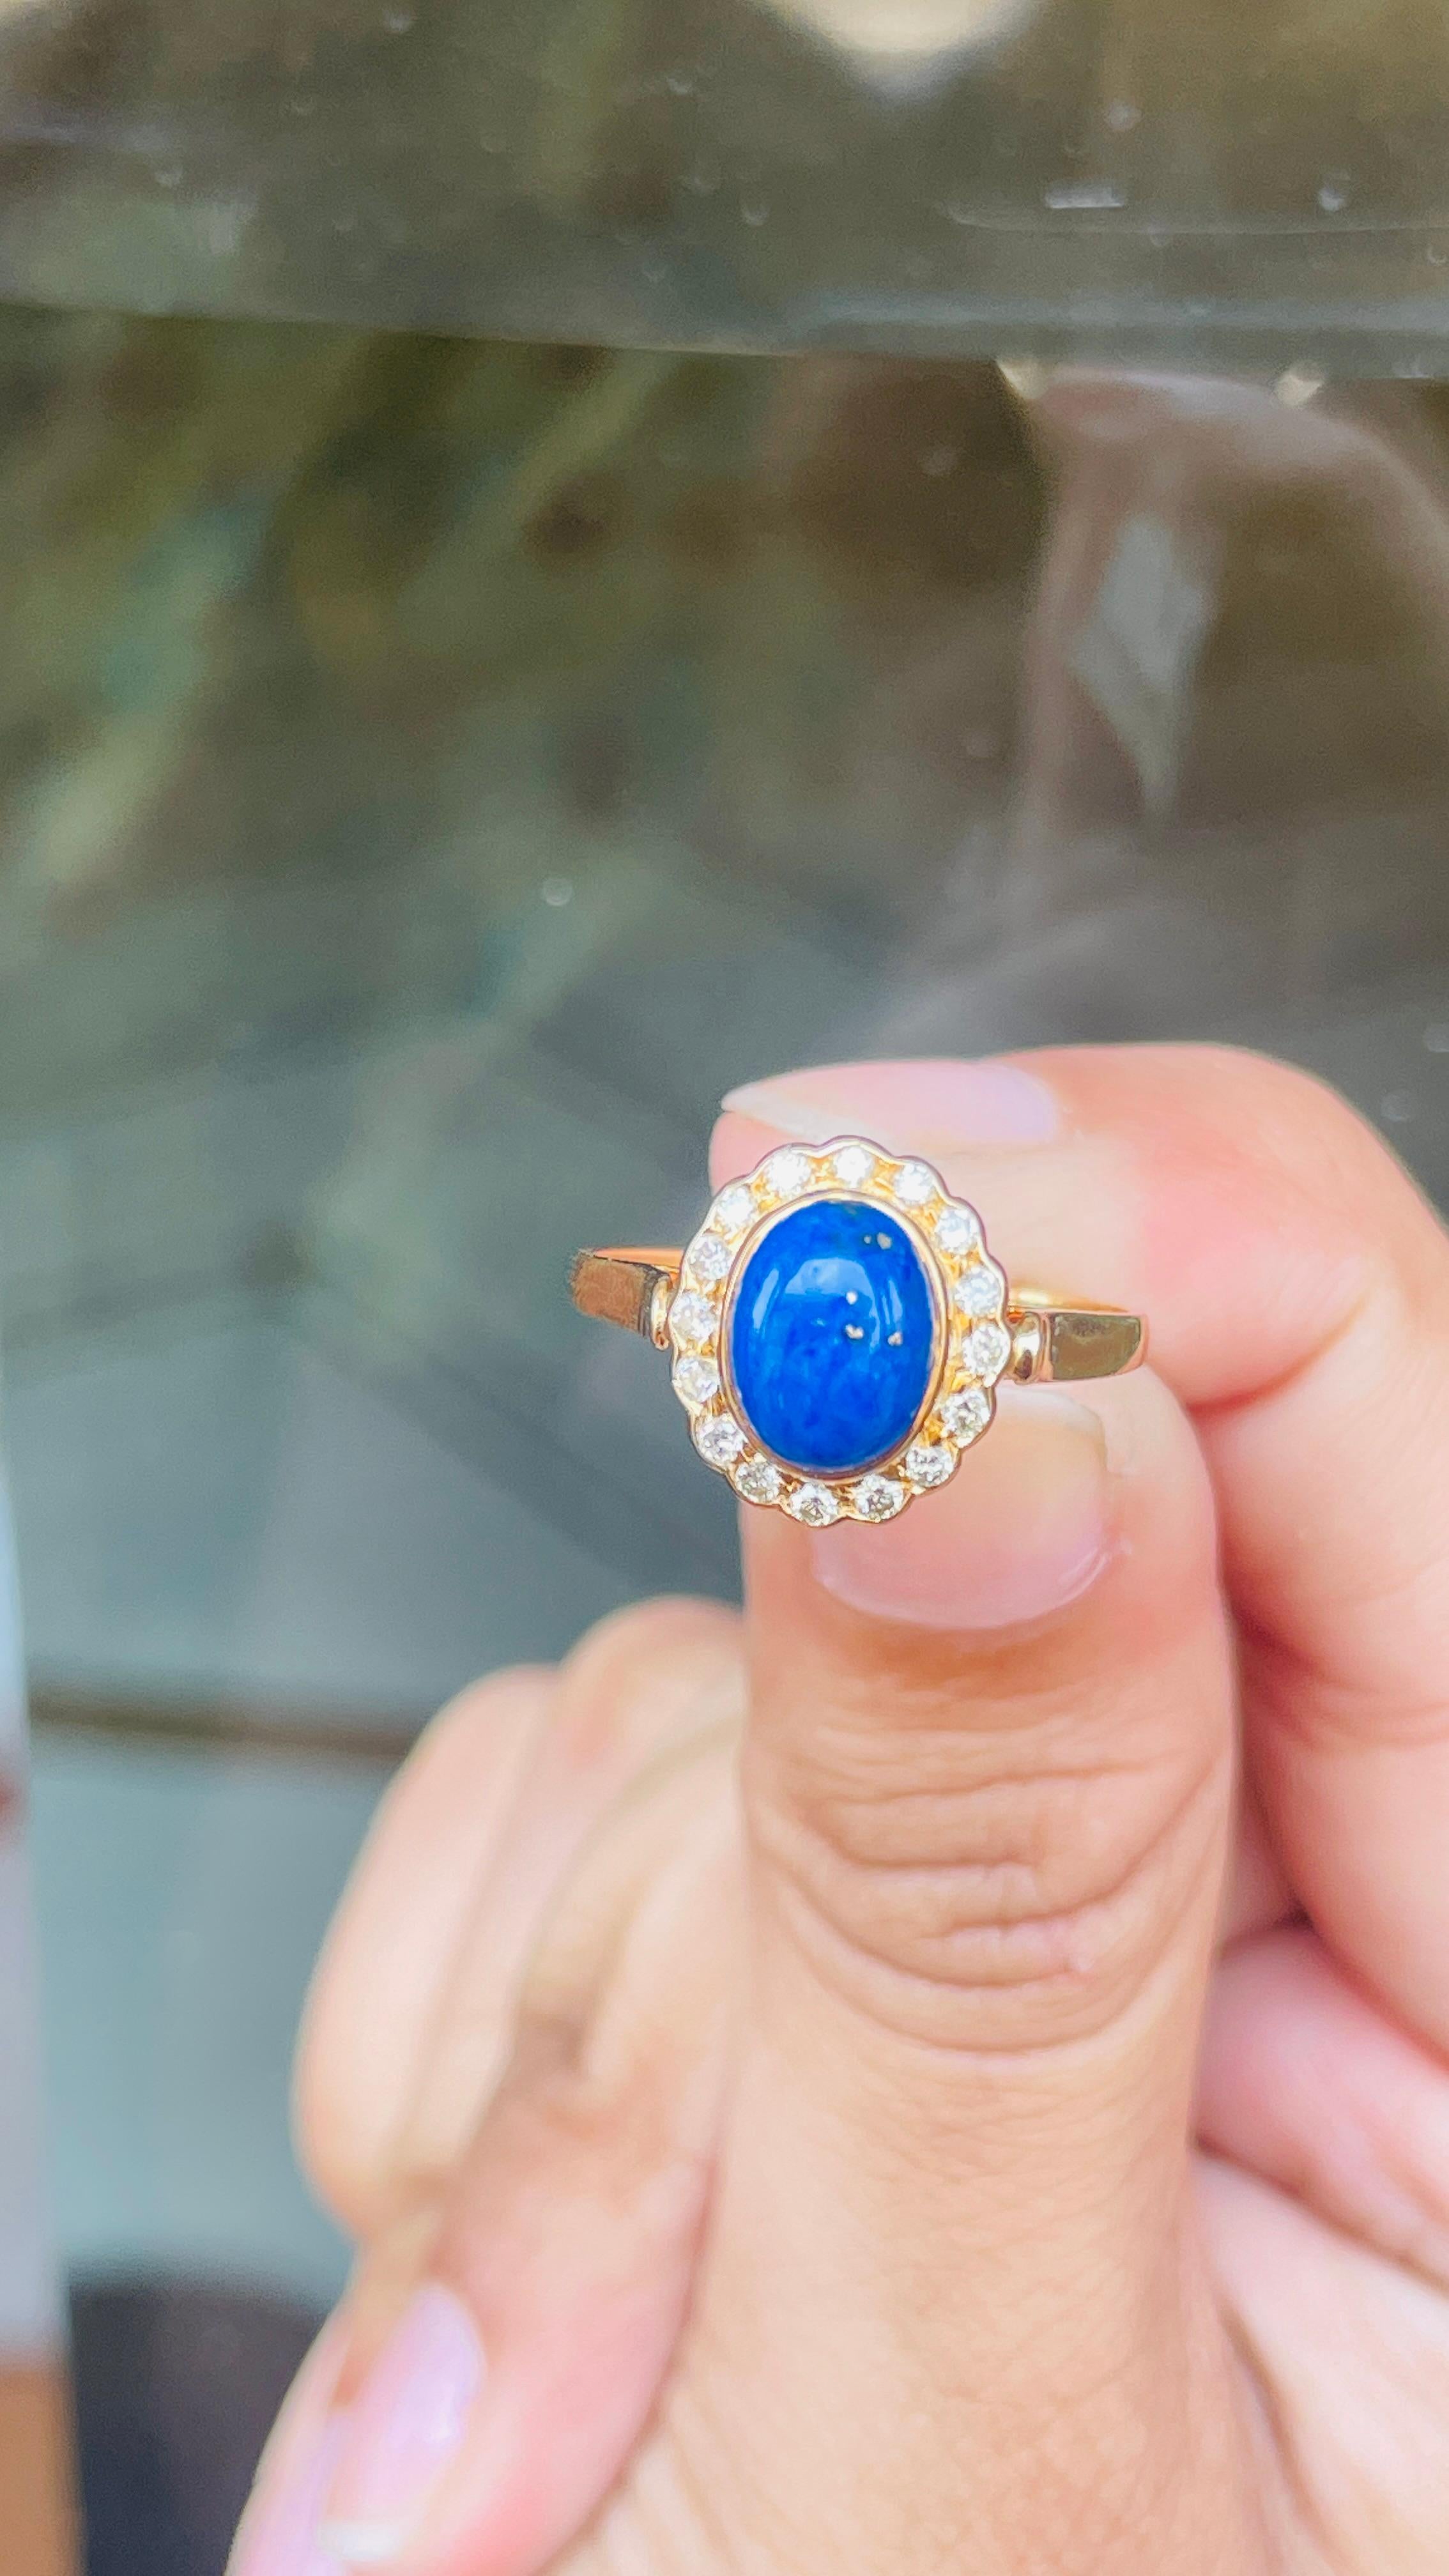 For Sale:  18K Yellow Gold 1.15 Carat Lapis Lazuli with Halo Diamond Cocktail Ring 13